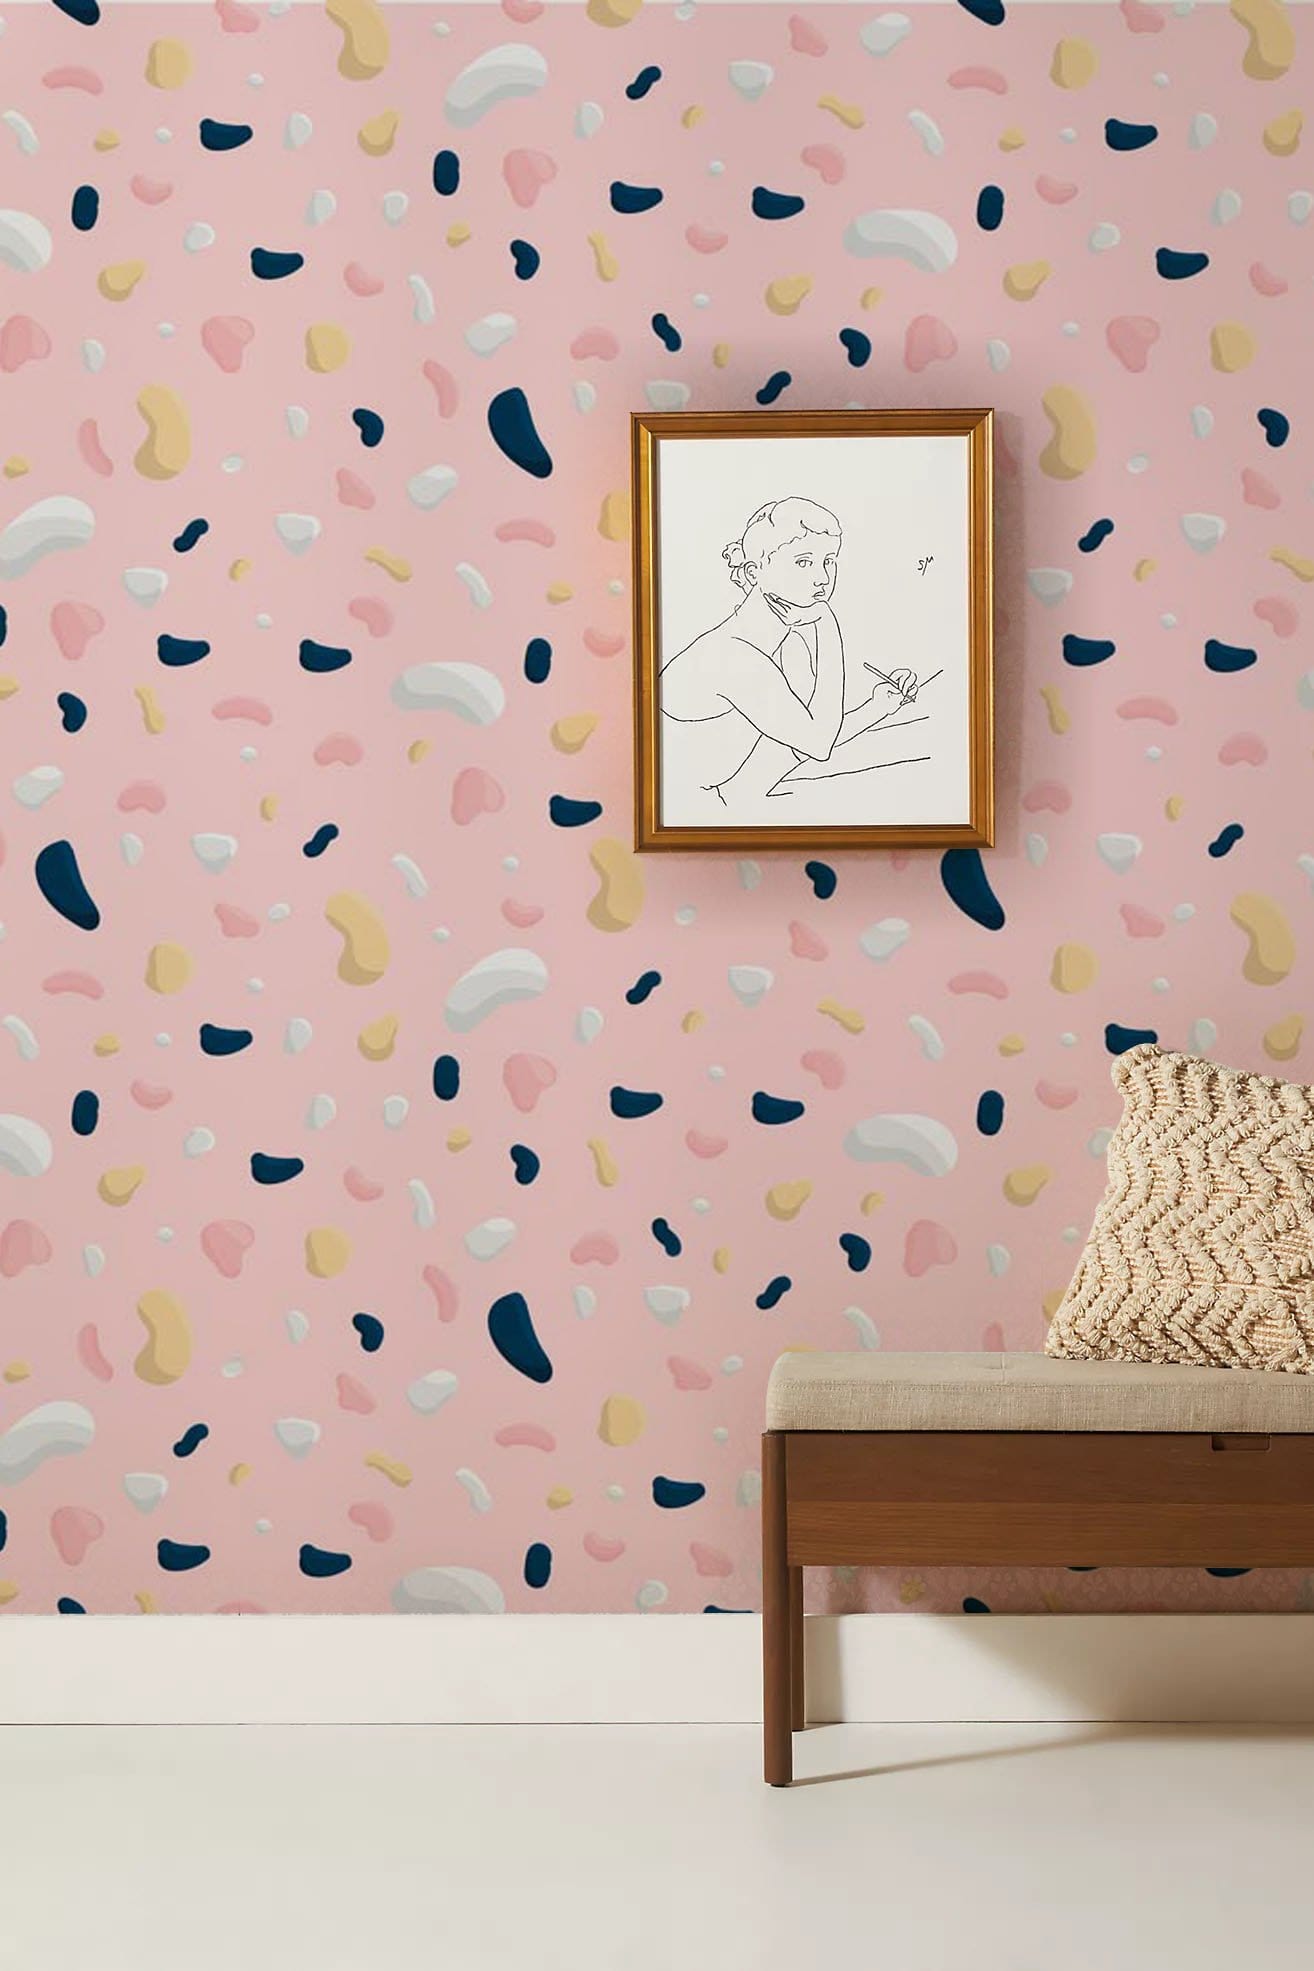 wallpaper mural in the hallway with a pink chip marble pattern